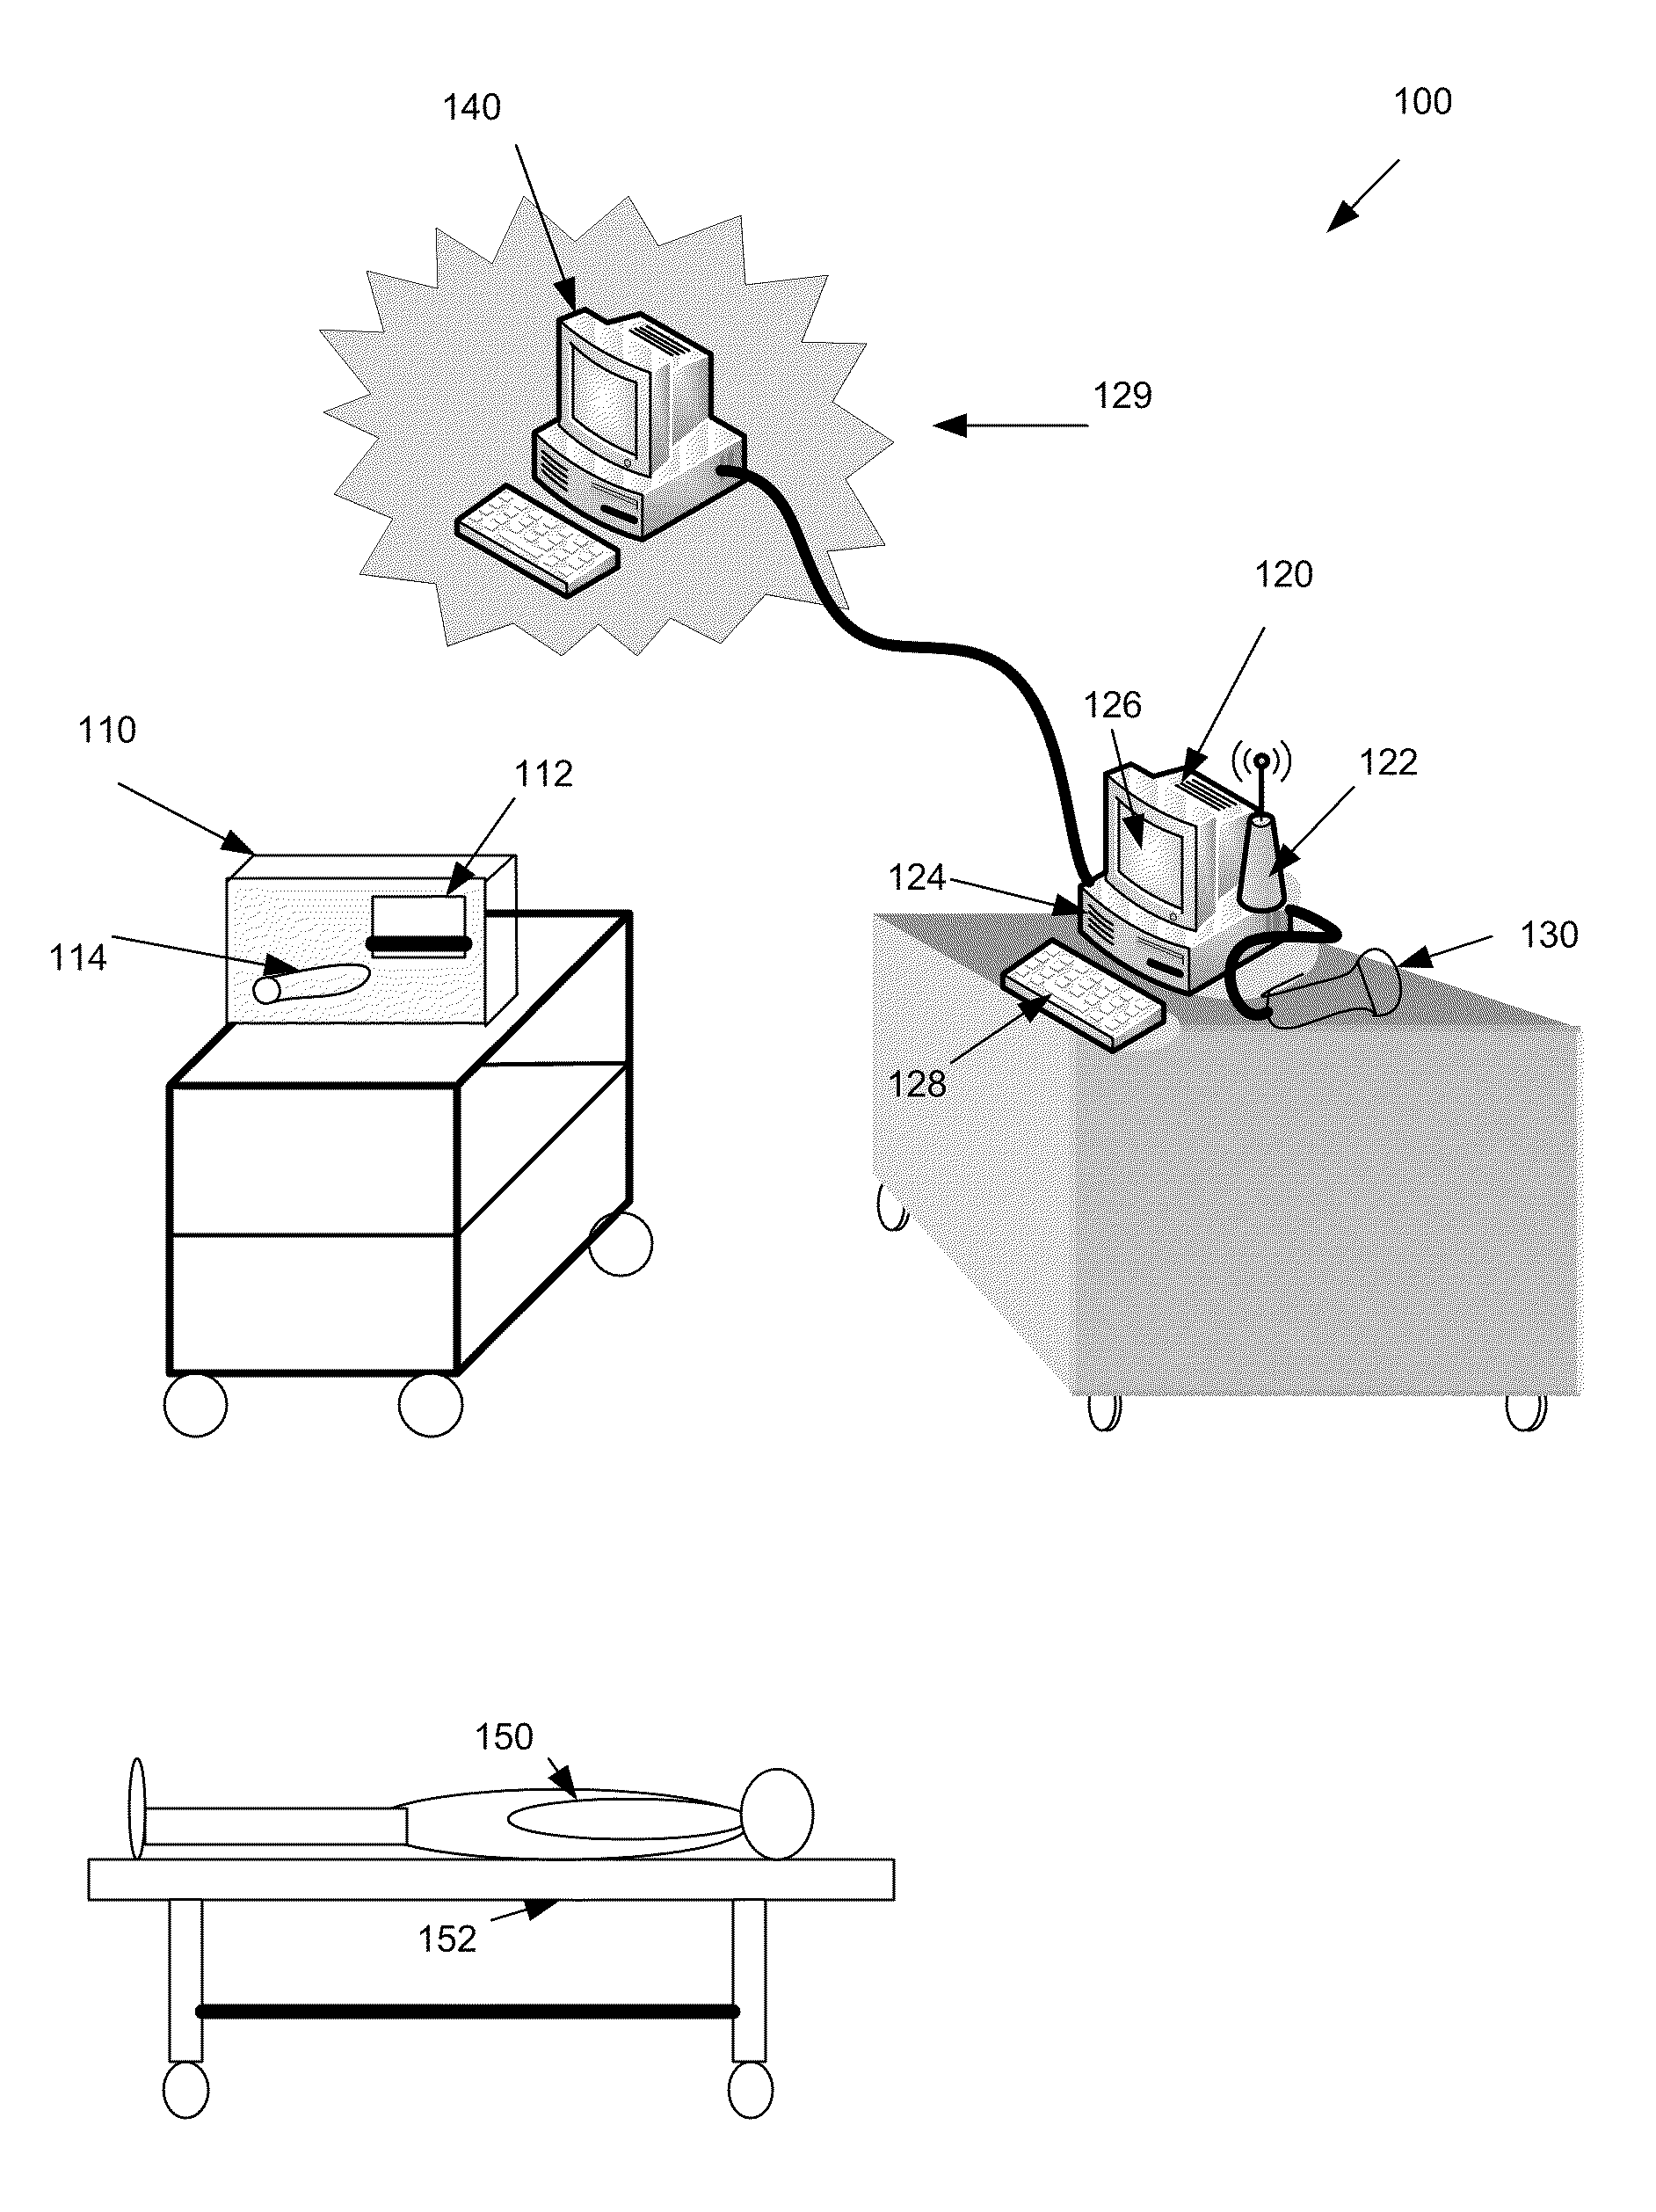 Medical treatment system including an ancillary medical treatment apparatus with an associated data storage medium